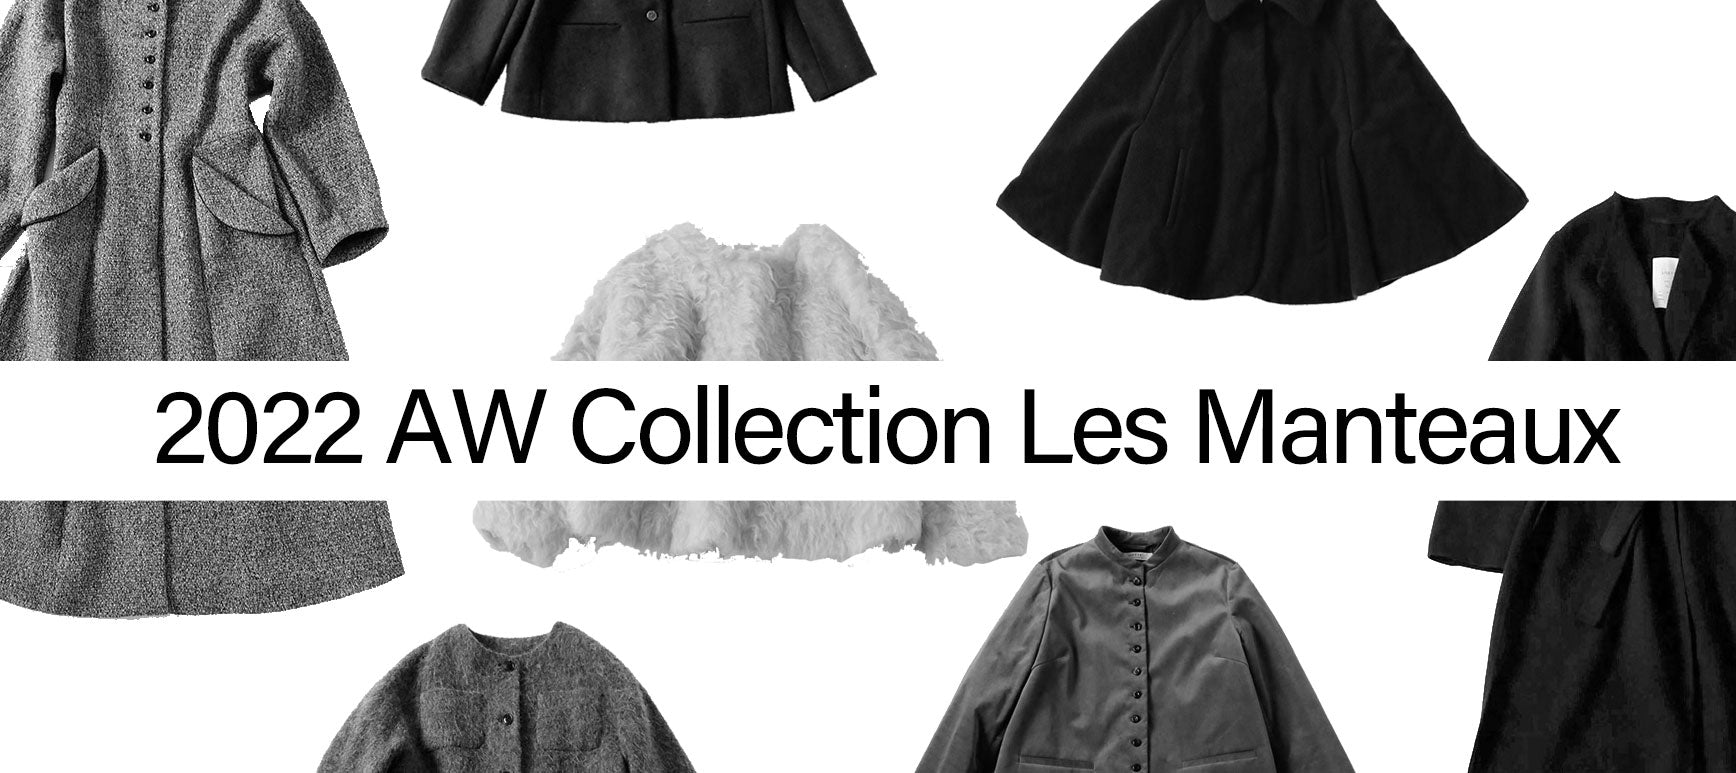 LISETTE-2022 AW Collection Les Manteaux – Envelope - エンベロープ ...